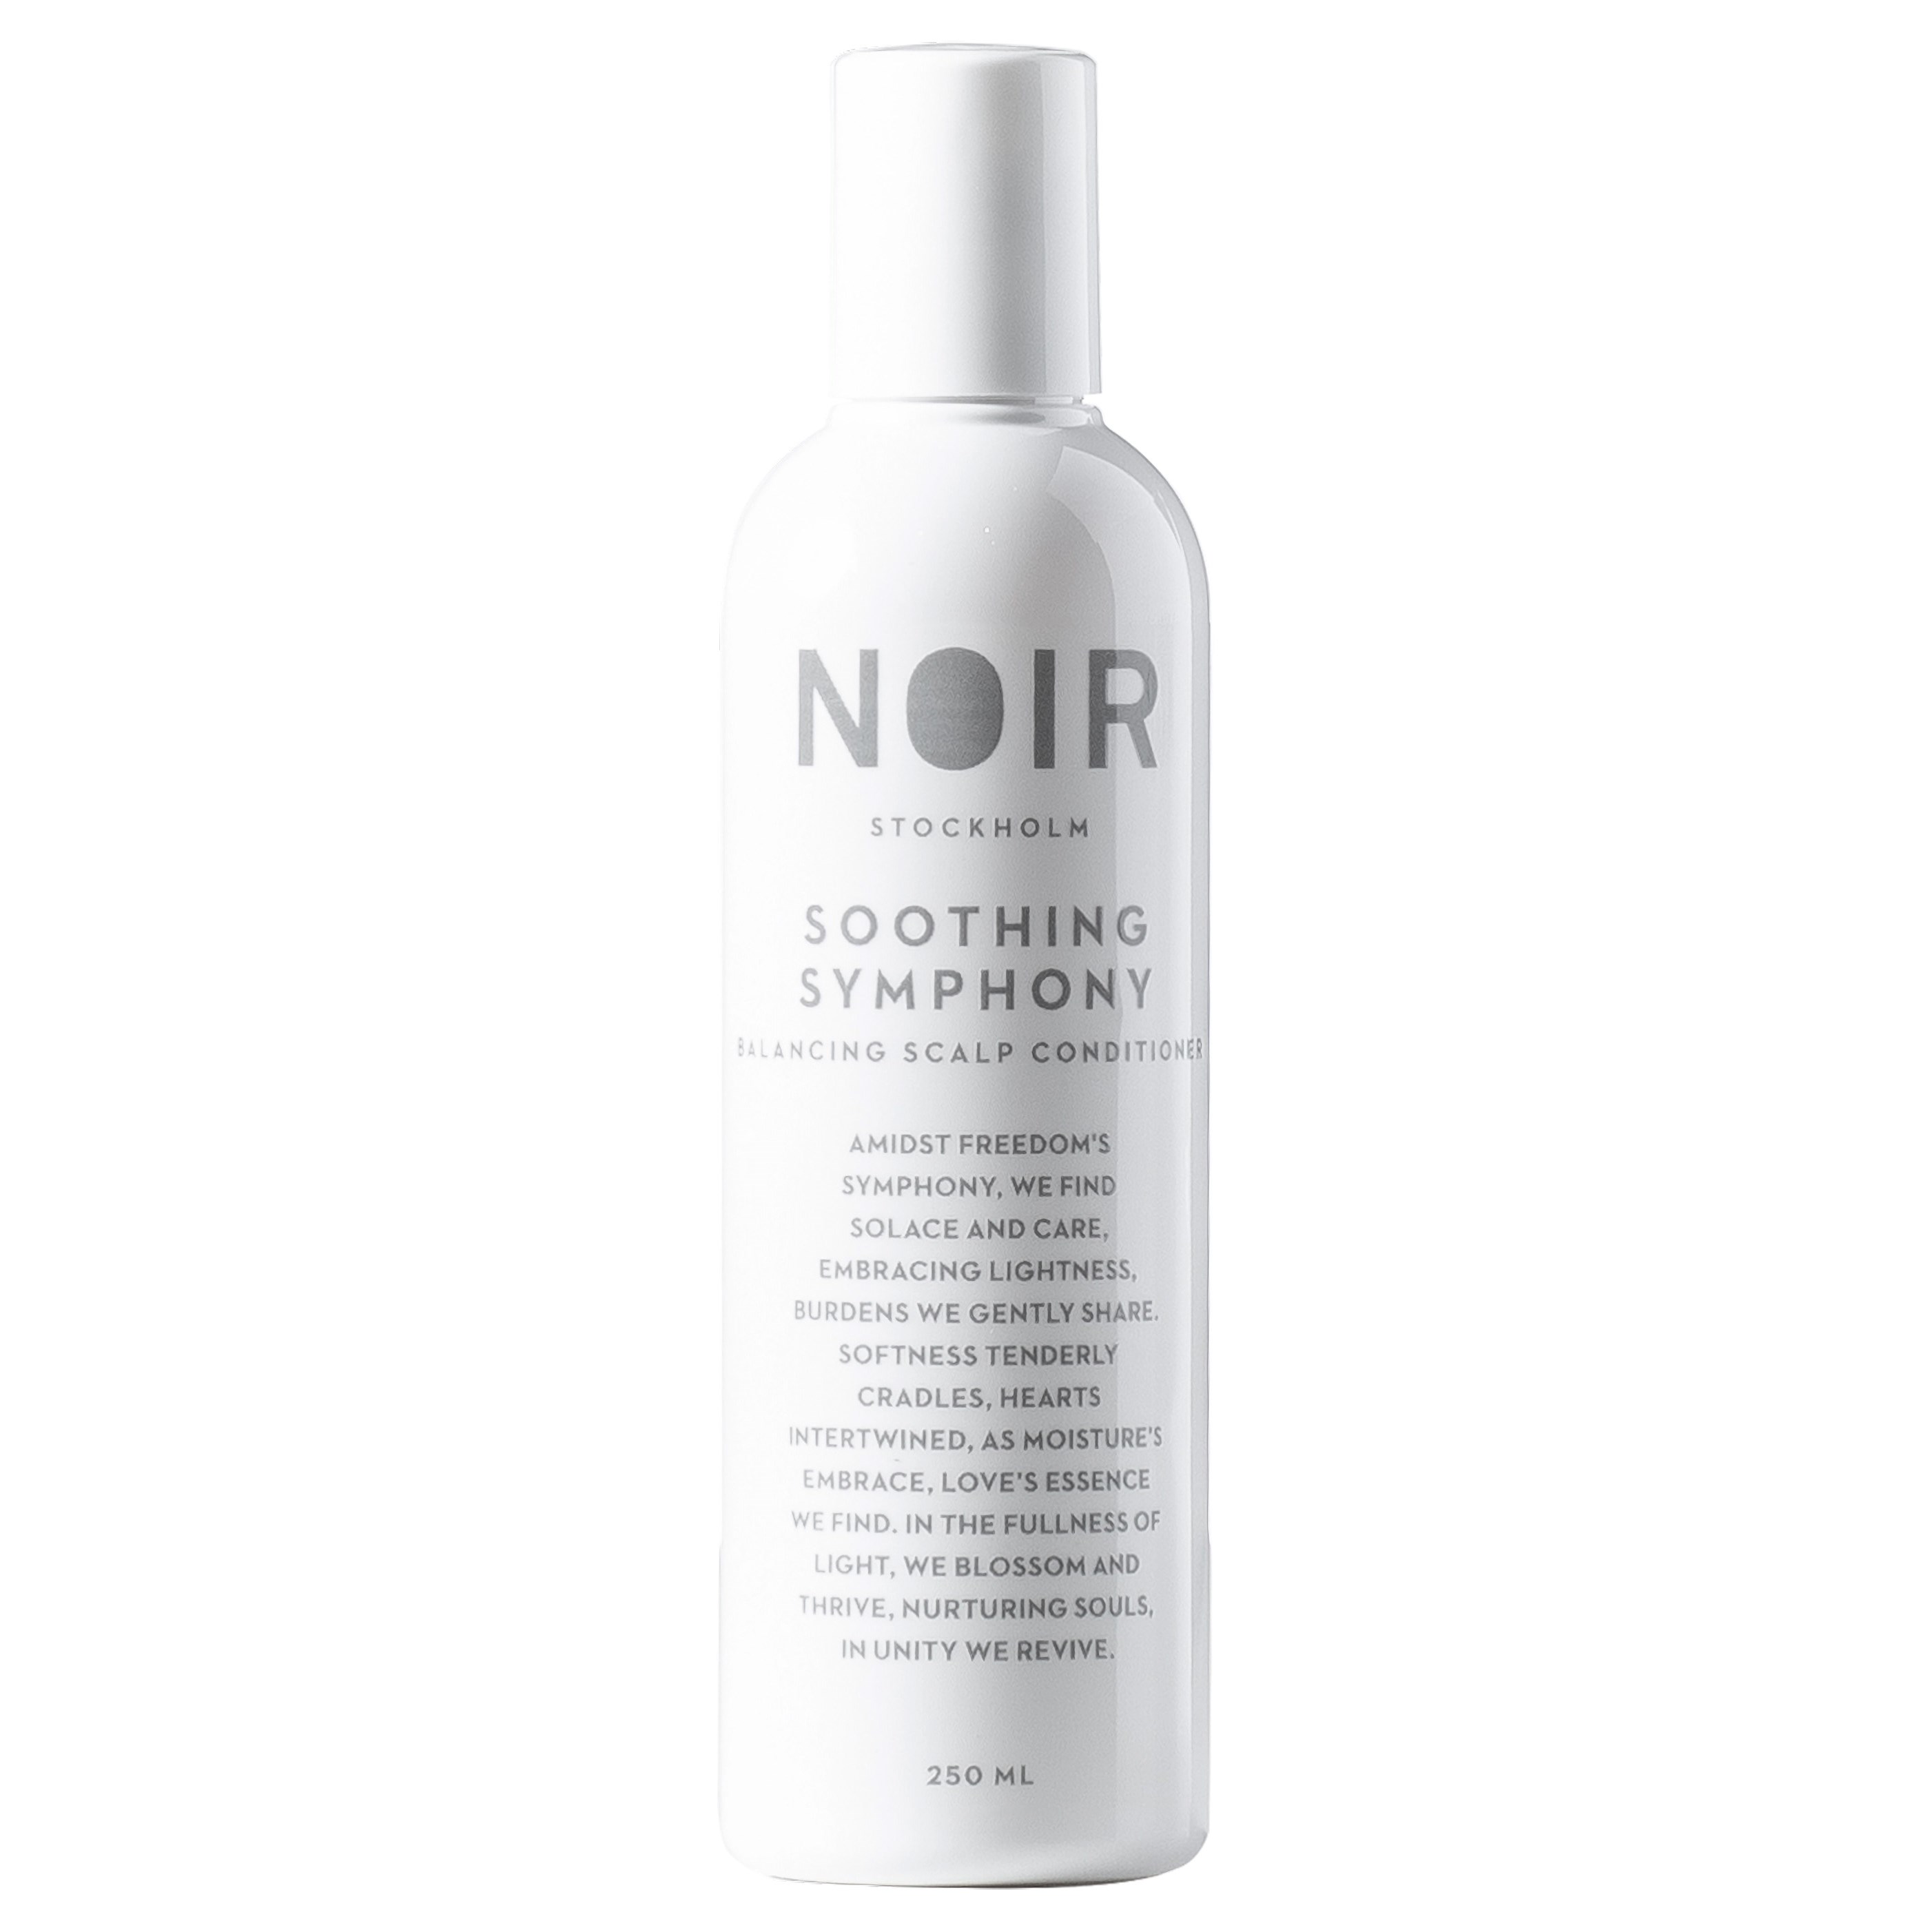 NOIR Stockholm Soothing Symphony Balancing Scalp Conditioner 250 ml